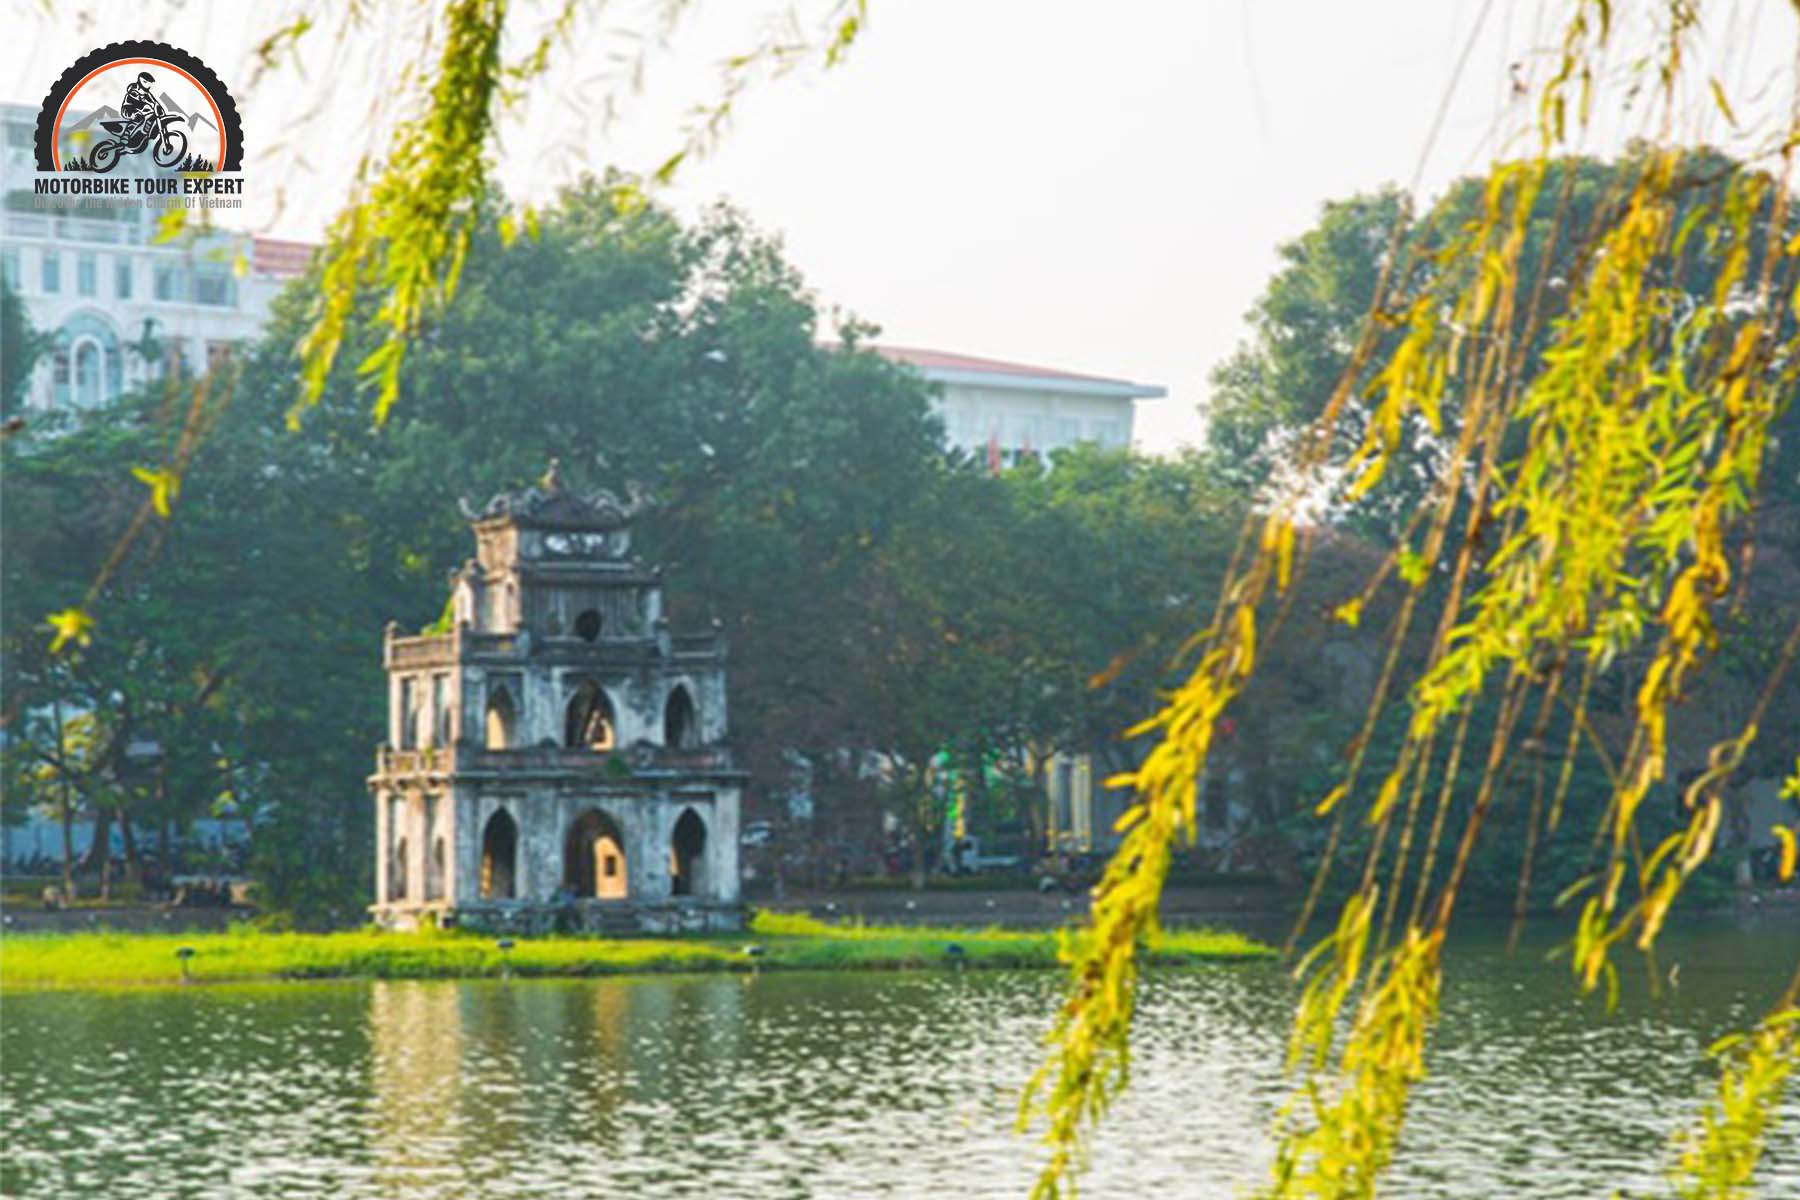 Hanoi is blessed with stunning weather